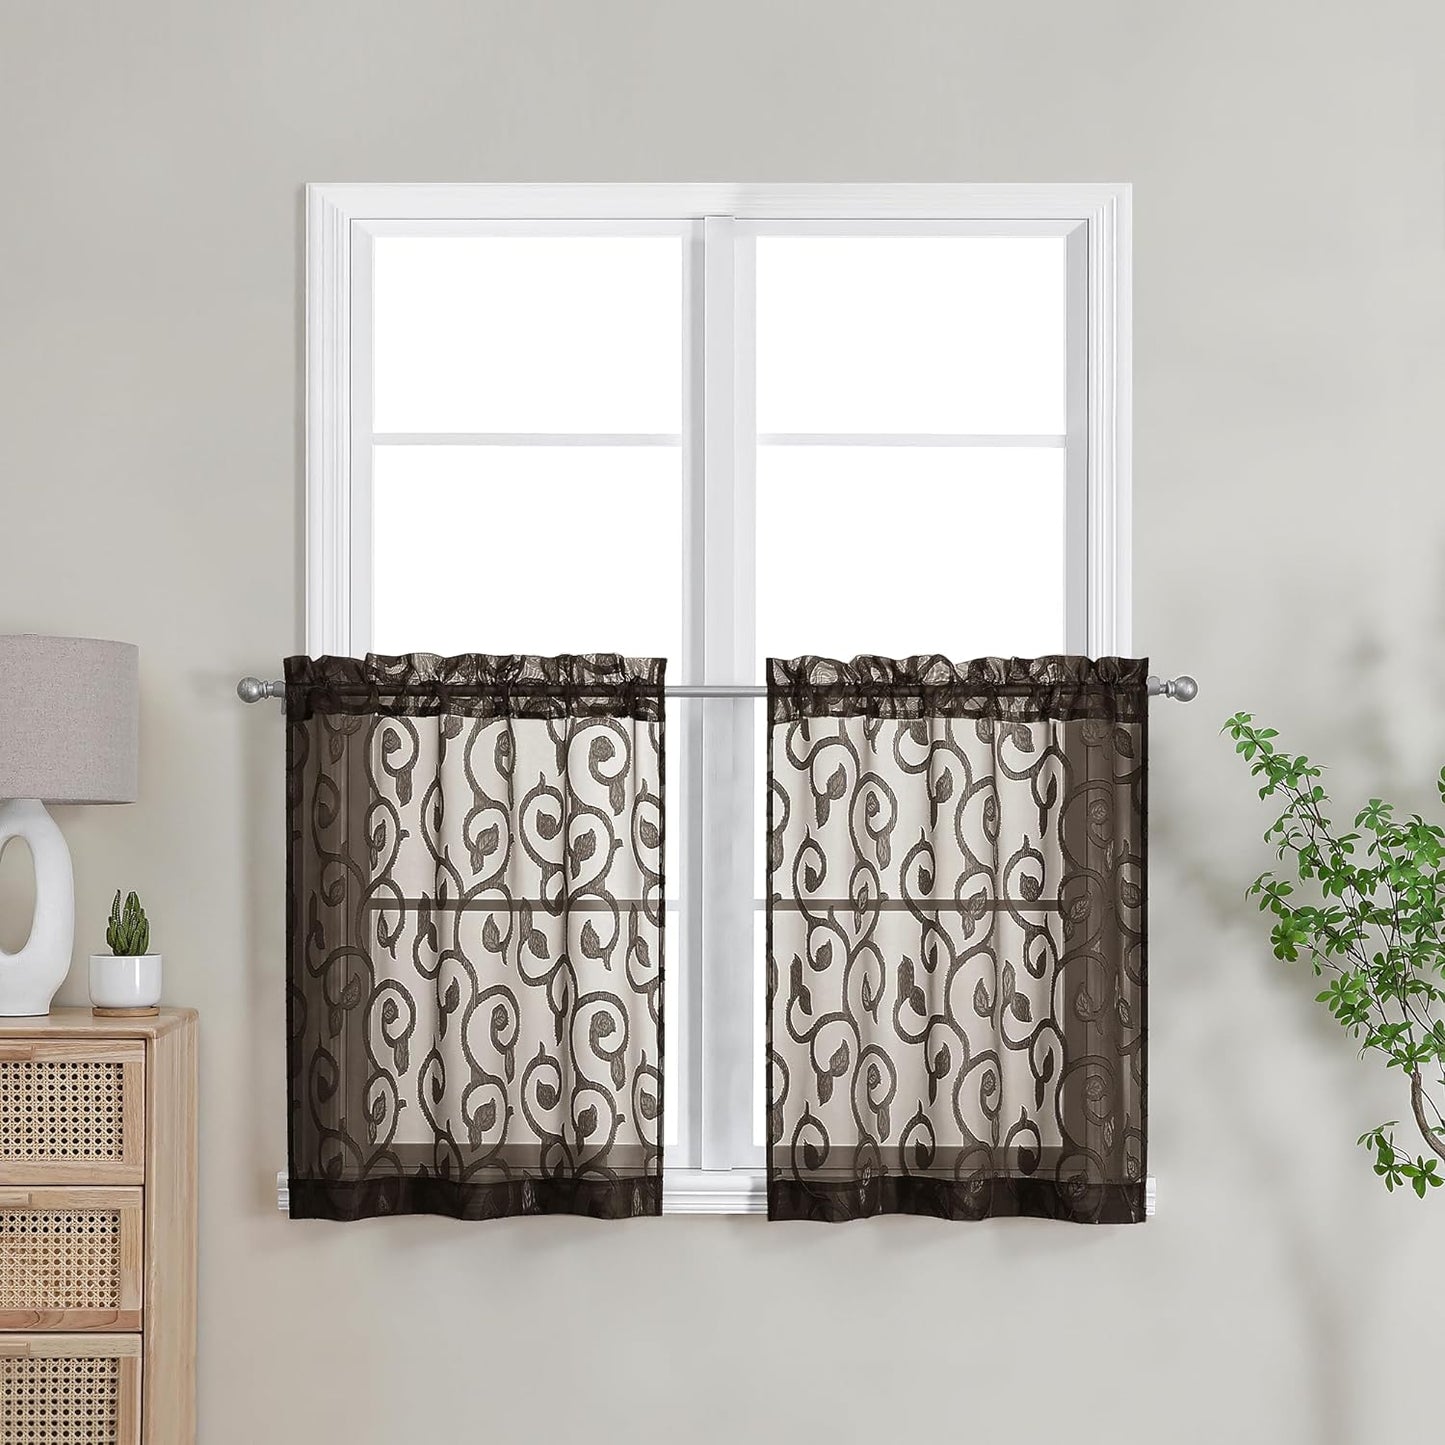 OWENIE Furman Sheer White Curtains 84 Inches Long for Bedroom Living Room 2 Panels Set, White Curtains Jacquard Clip Light Filtering Semi Sheer Curtain Transparent Rod Pocket Window Drapes, 2 Pcs  OWENIE Chocolate 26W X 24L 